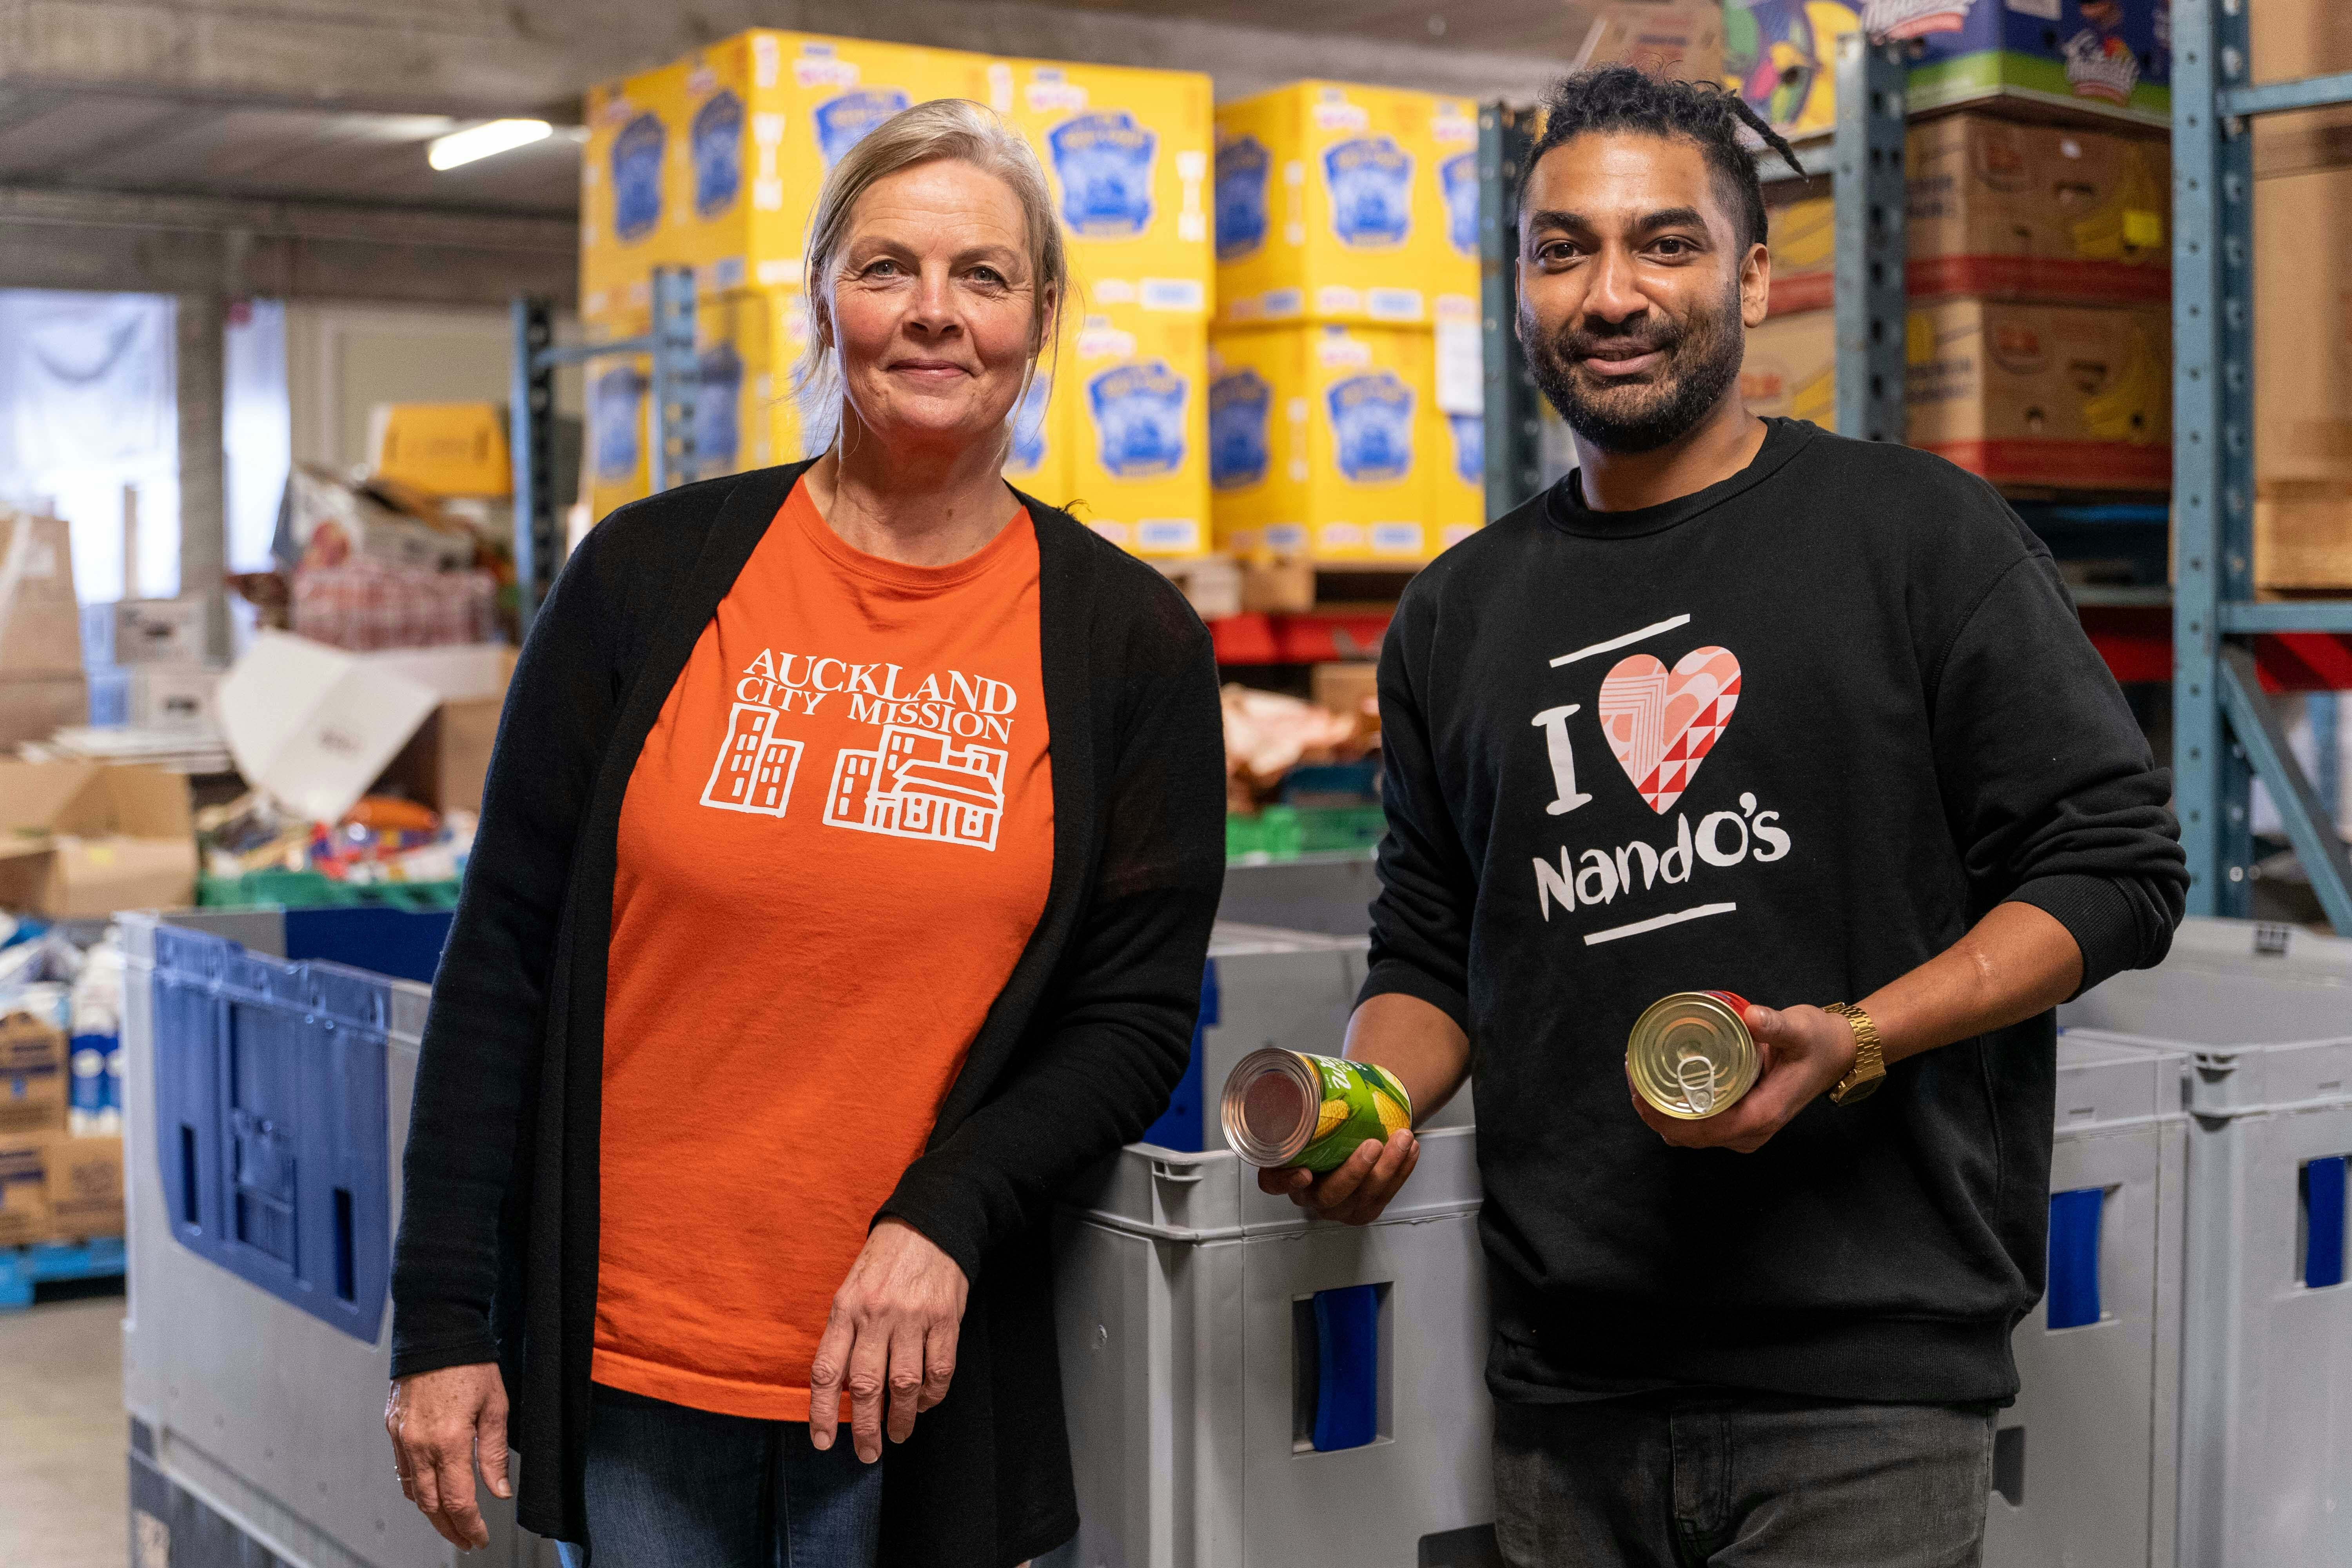 Auckland City Mission staff member and Nando's staff member at the Mission's distribution centre.